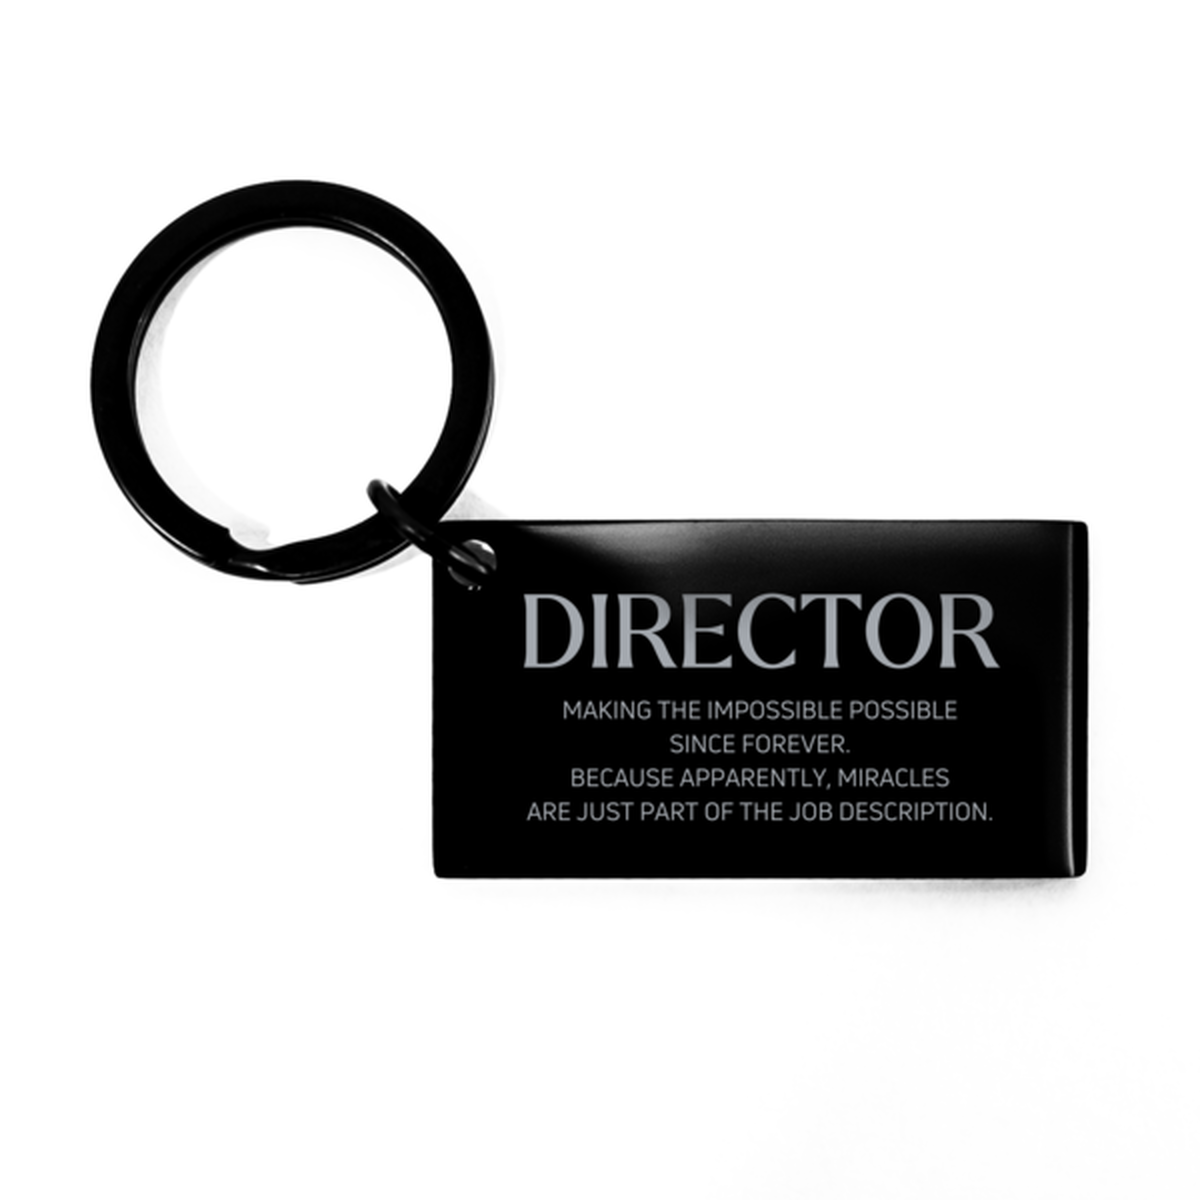 Funny Director Gifts, Miracles are just part of the job description, Inspirational Birthday Keychain For Director, Men, Women, Coworkers, Friends, Boss